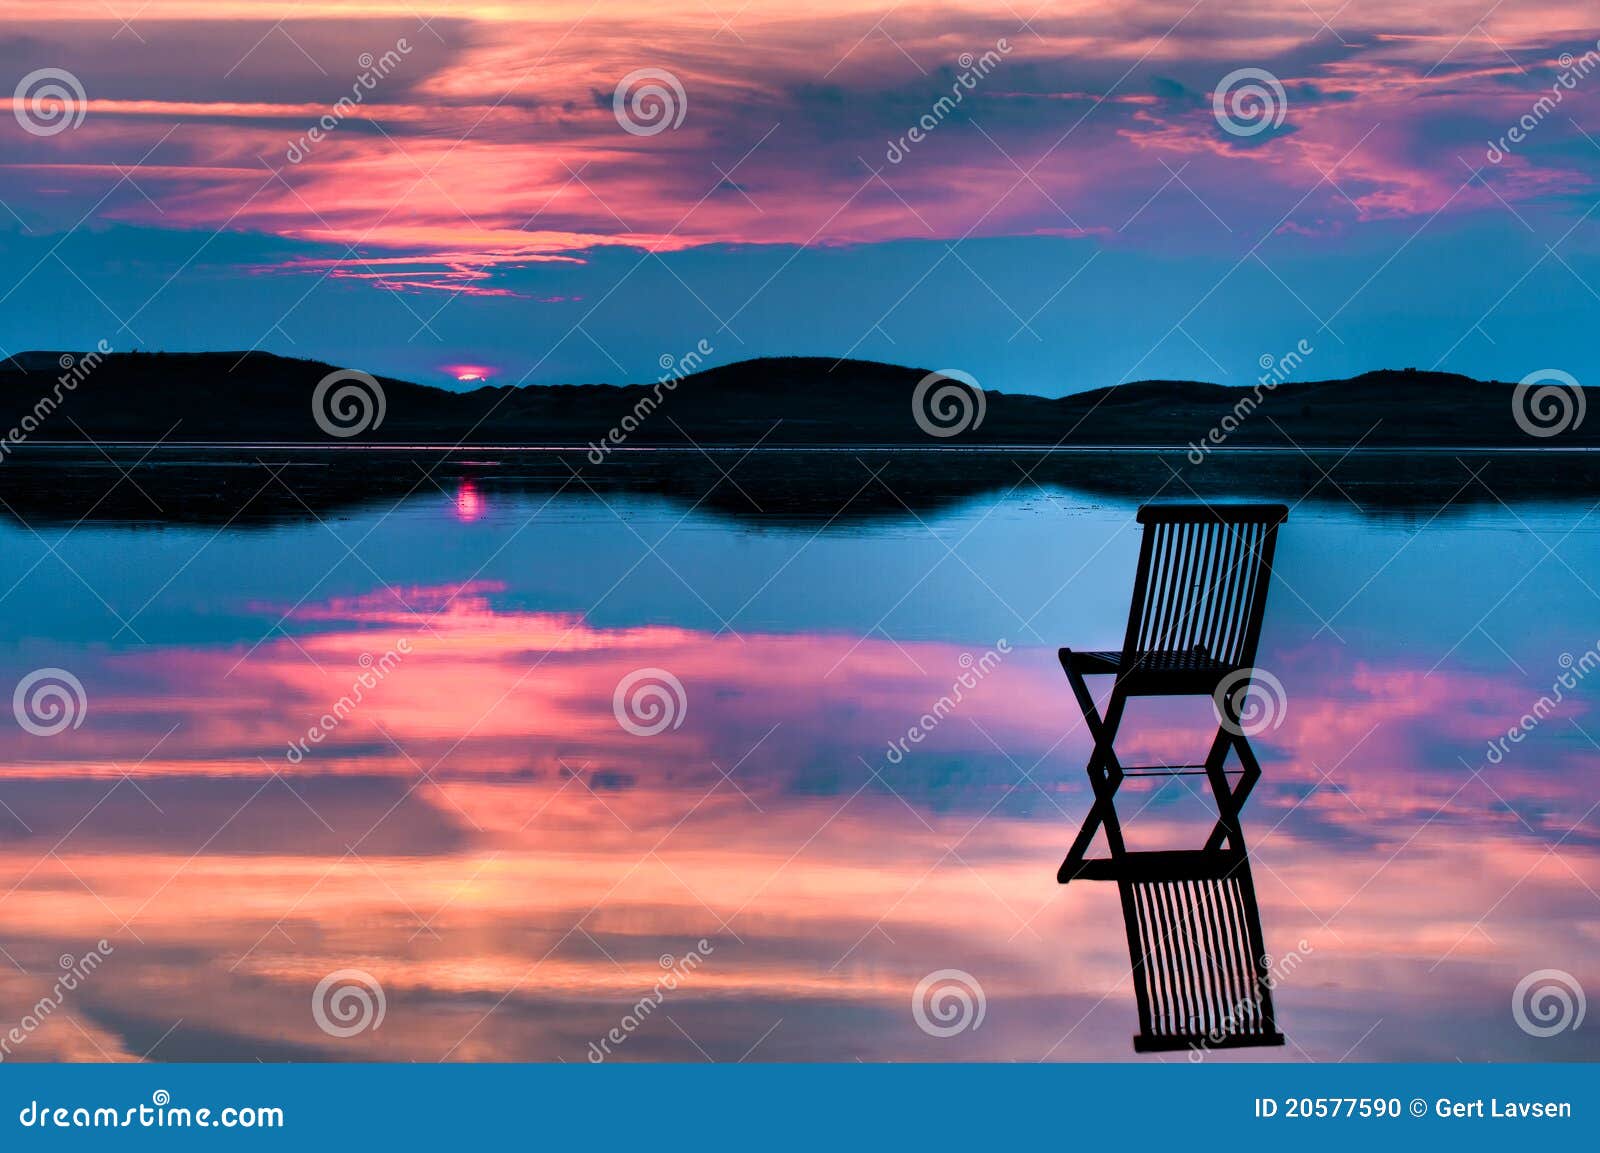 scenic view of sunset with chair in calm water